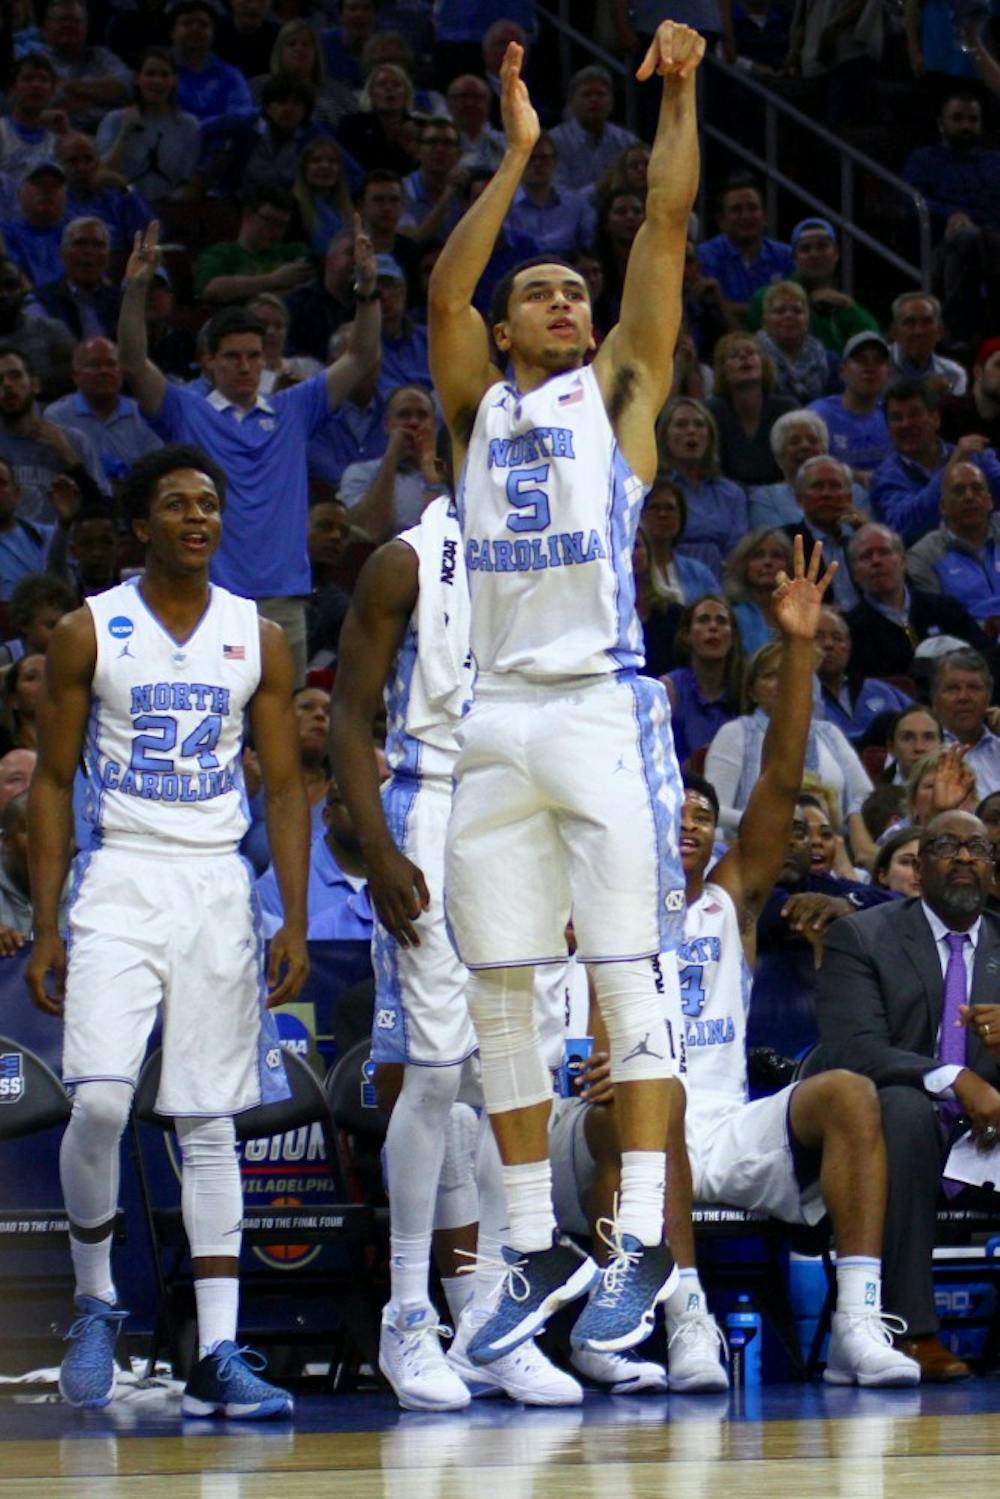 Marcus Paige shoots a 3-point shot during the second half.